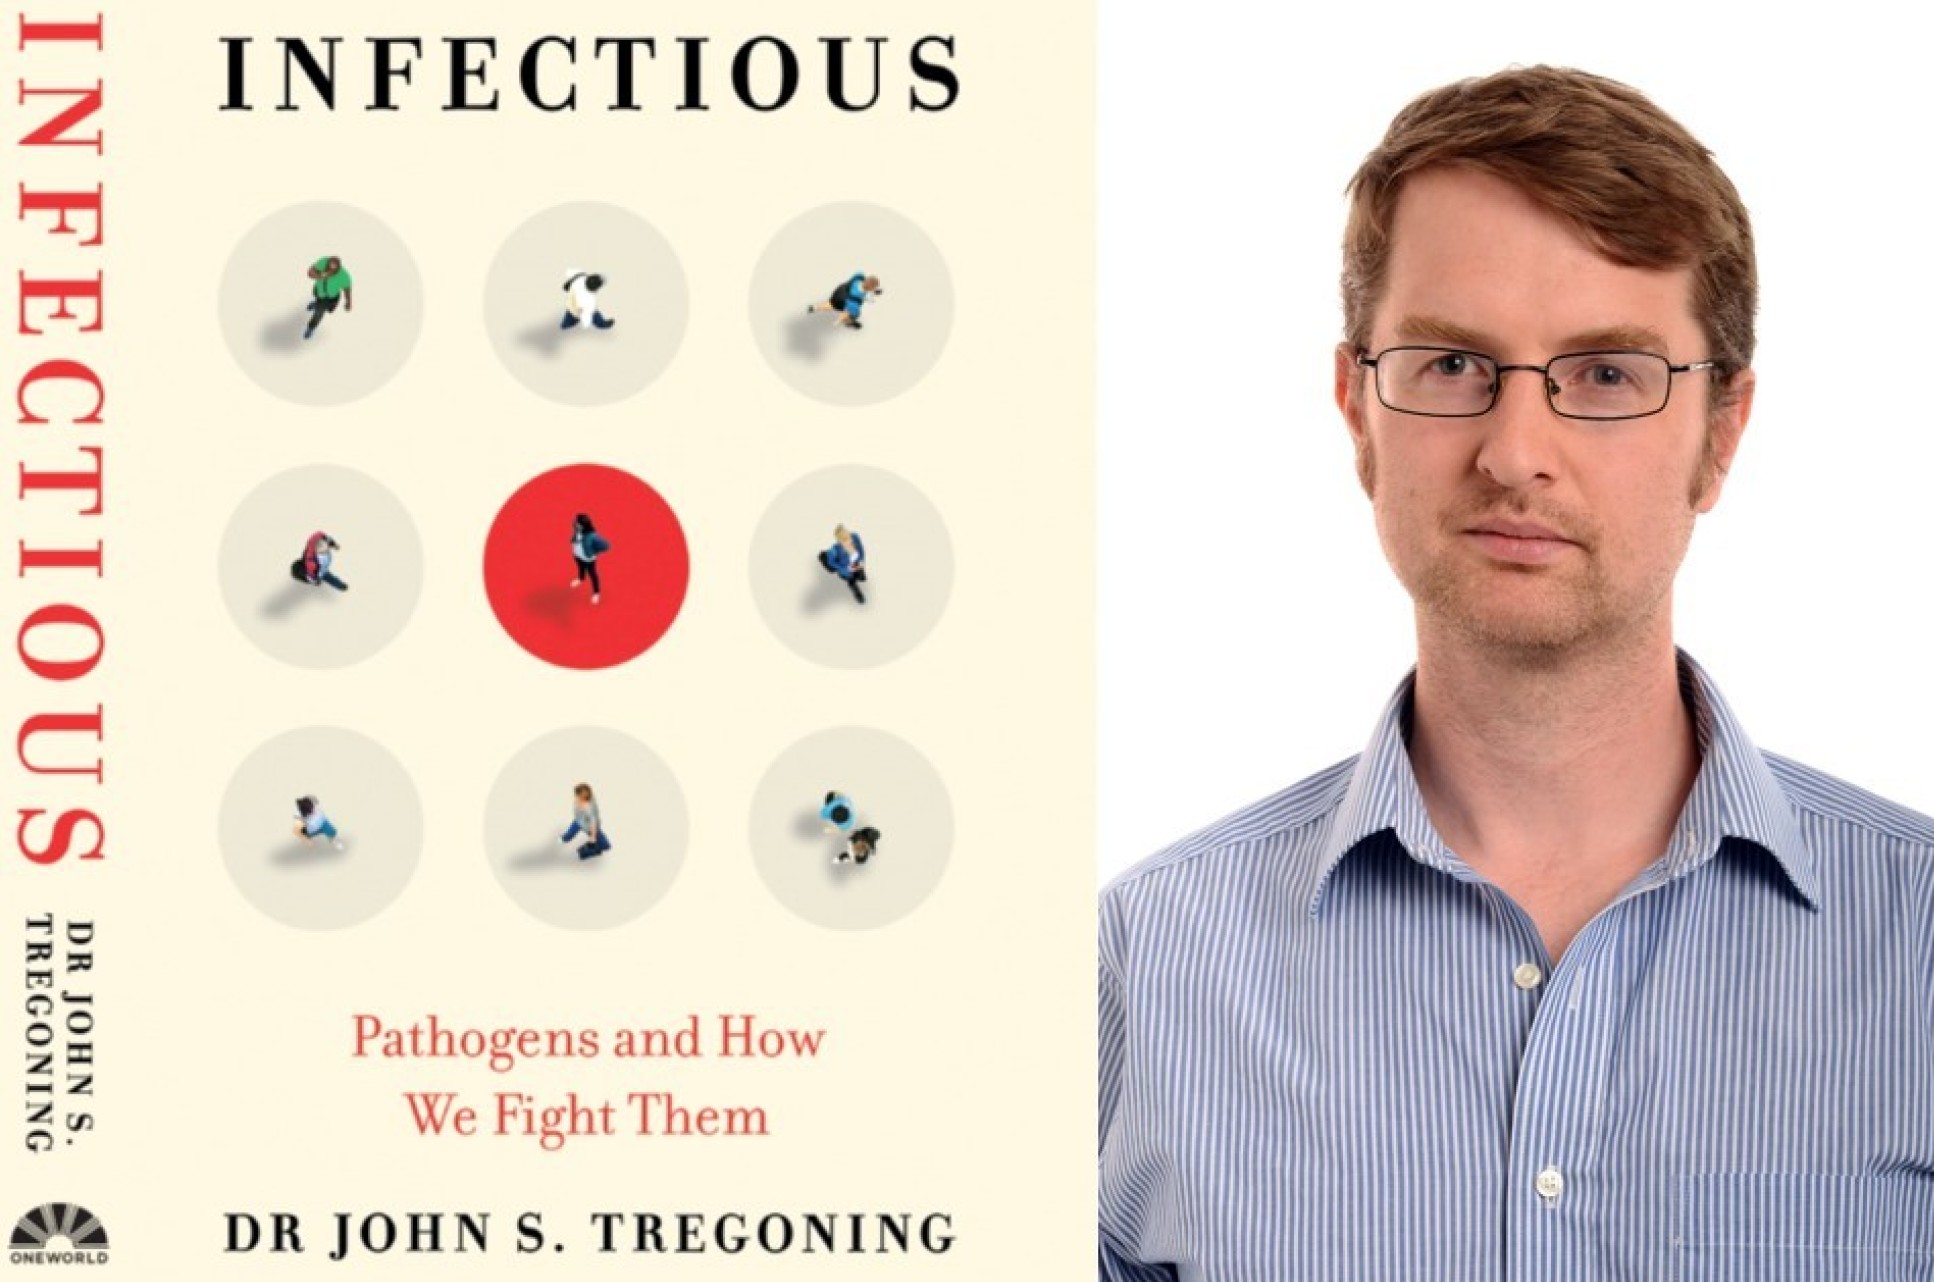 John Tregoning and his new book, Infectious: Pathogens and how we fight them